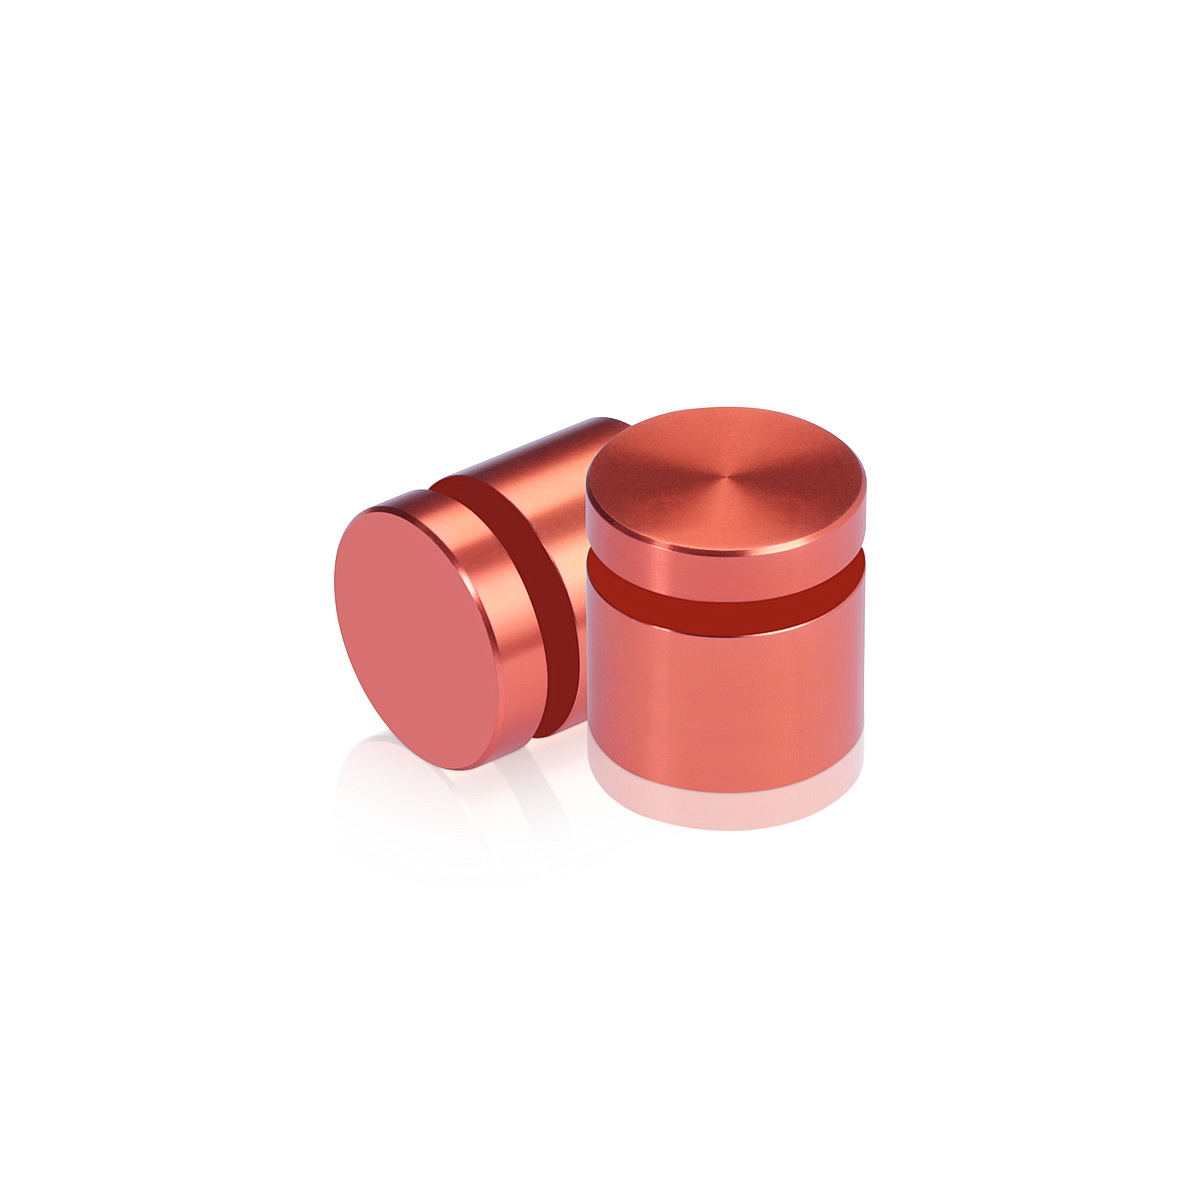 3/4'' Diameter X 1/2'' Barrel Length, Affordable Aluminum Standoffs, Copper Anodized Finish Easy Fasten Standoff (For Inside / Outside use) [Required Material Hole Size: 7/16'']